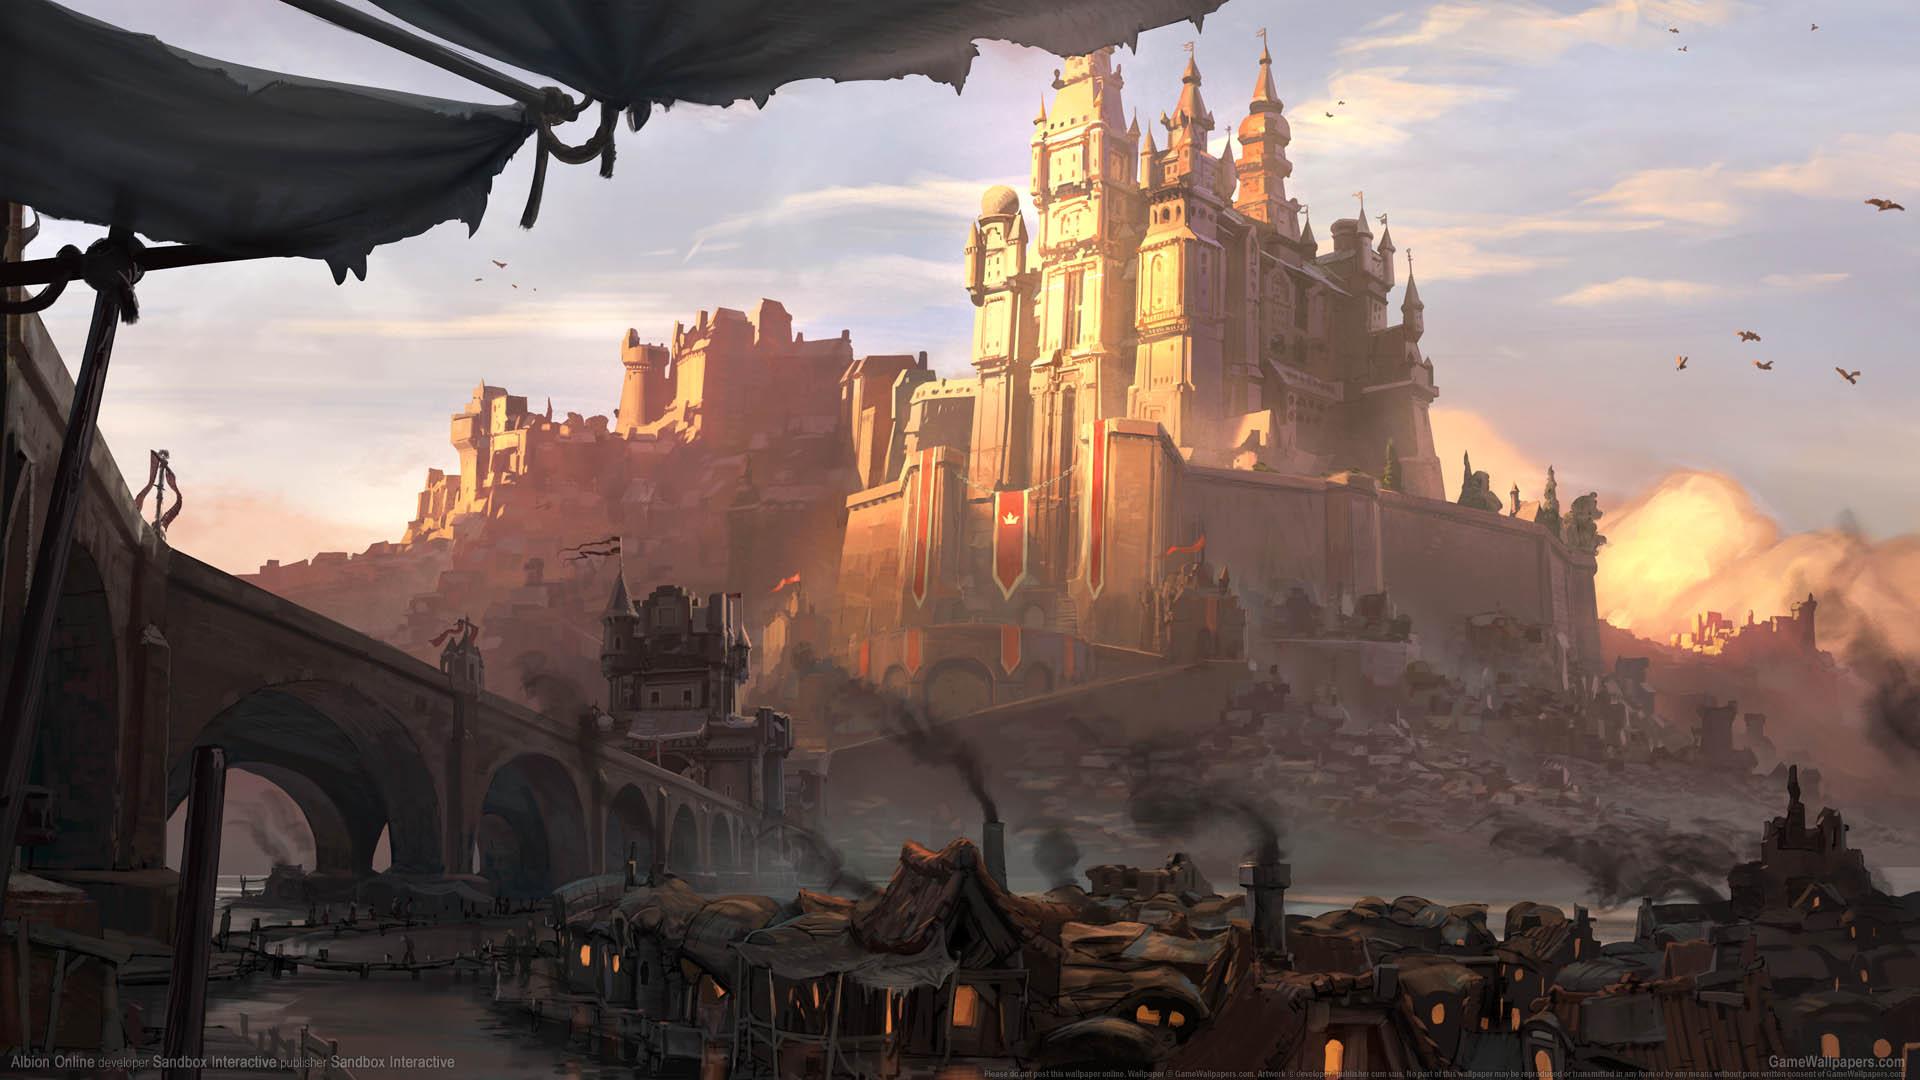 Albion Online - Six new wallpapers are available for